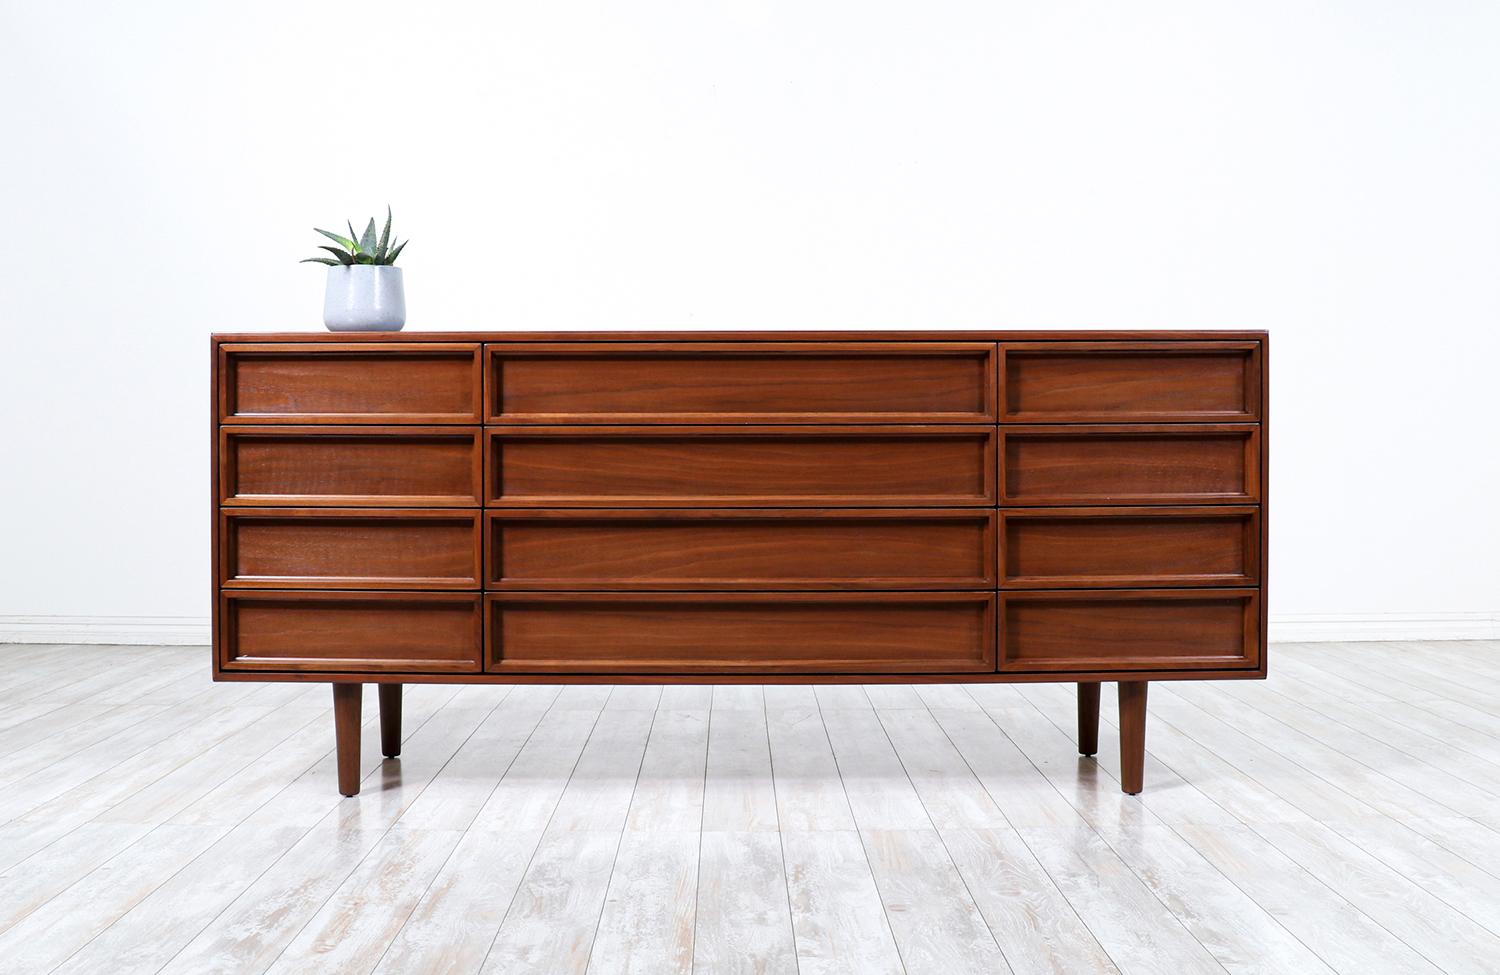 Mid-Century Modern dresser designed by John Keal for Brown Saltman in the California circa 1950’s. This minimalist dresser features a walnut wood case with twelve drawers and sits on sculpted tapered legs. The table has been professionally